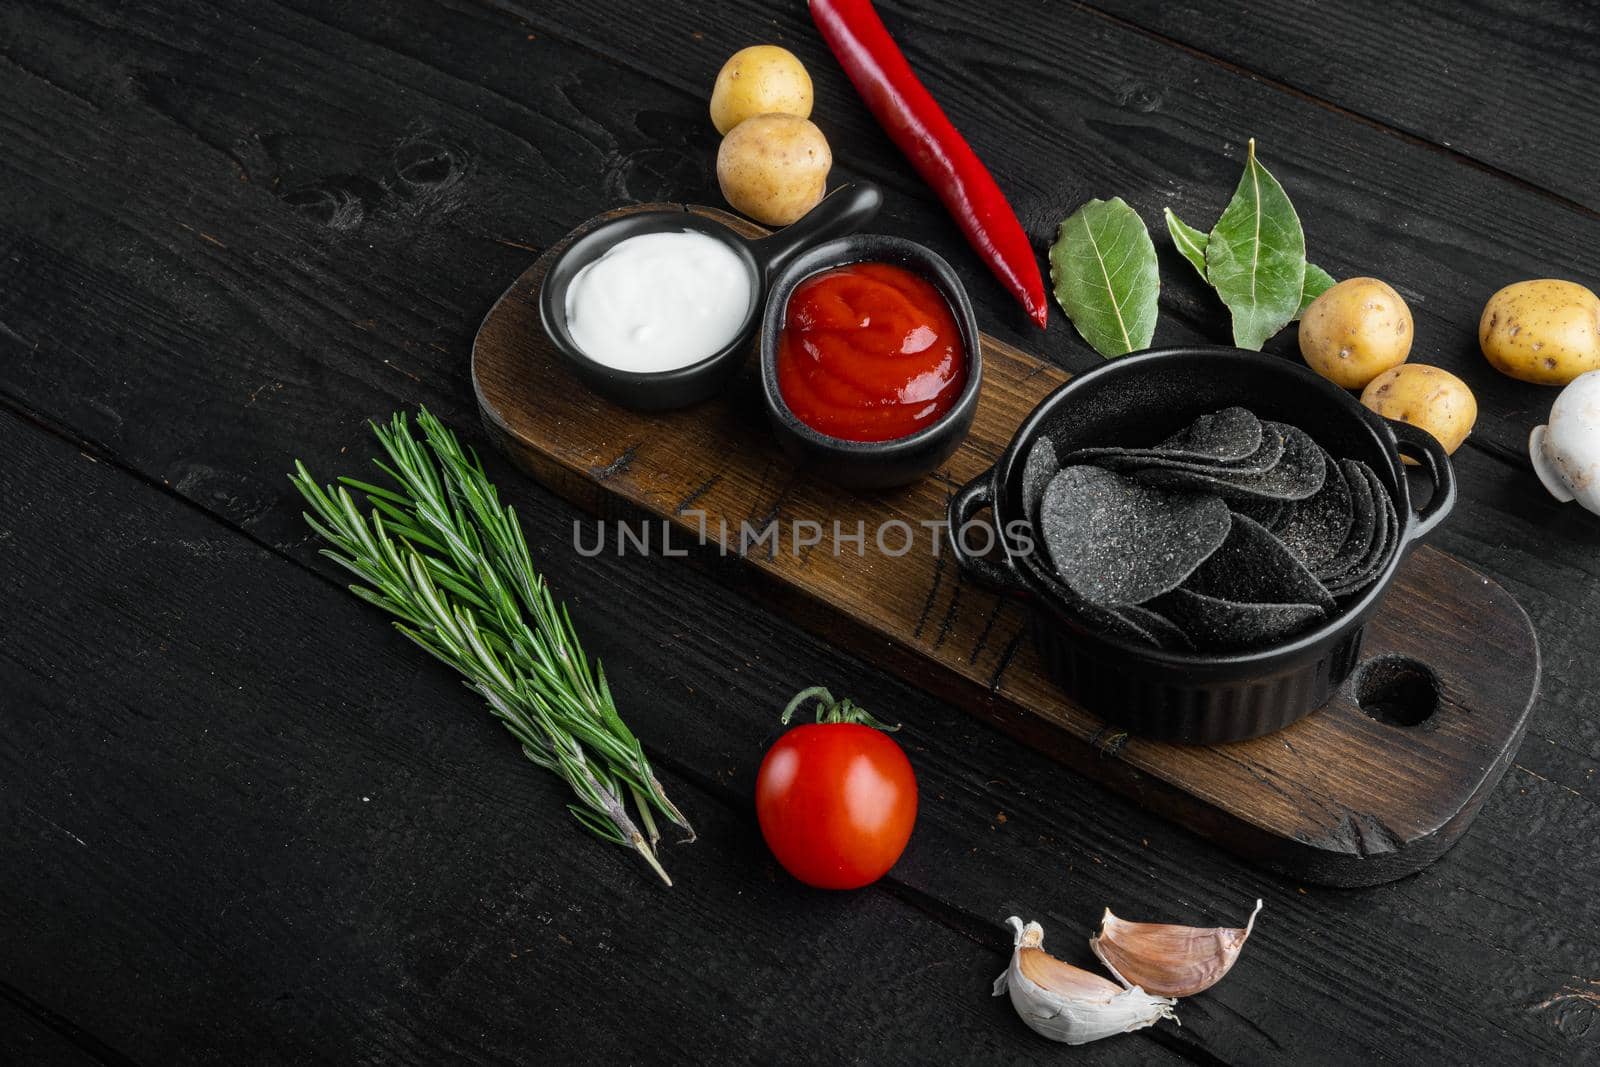 Cheese and chive potato crisp snack set, on black wooden background